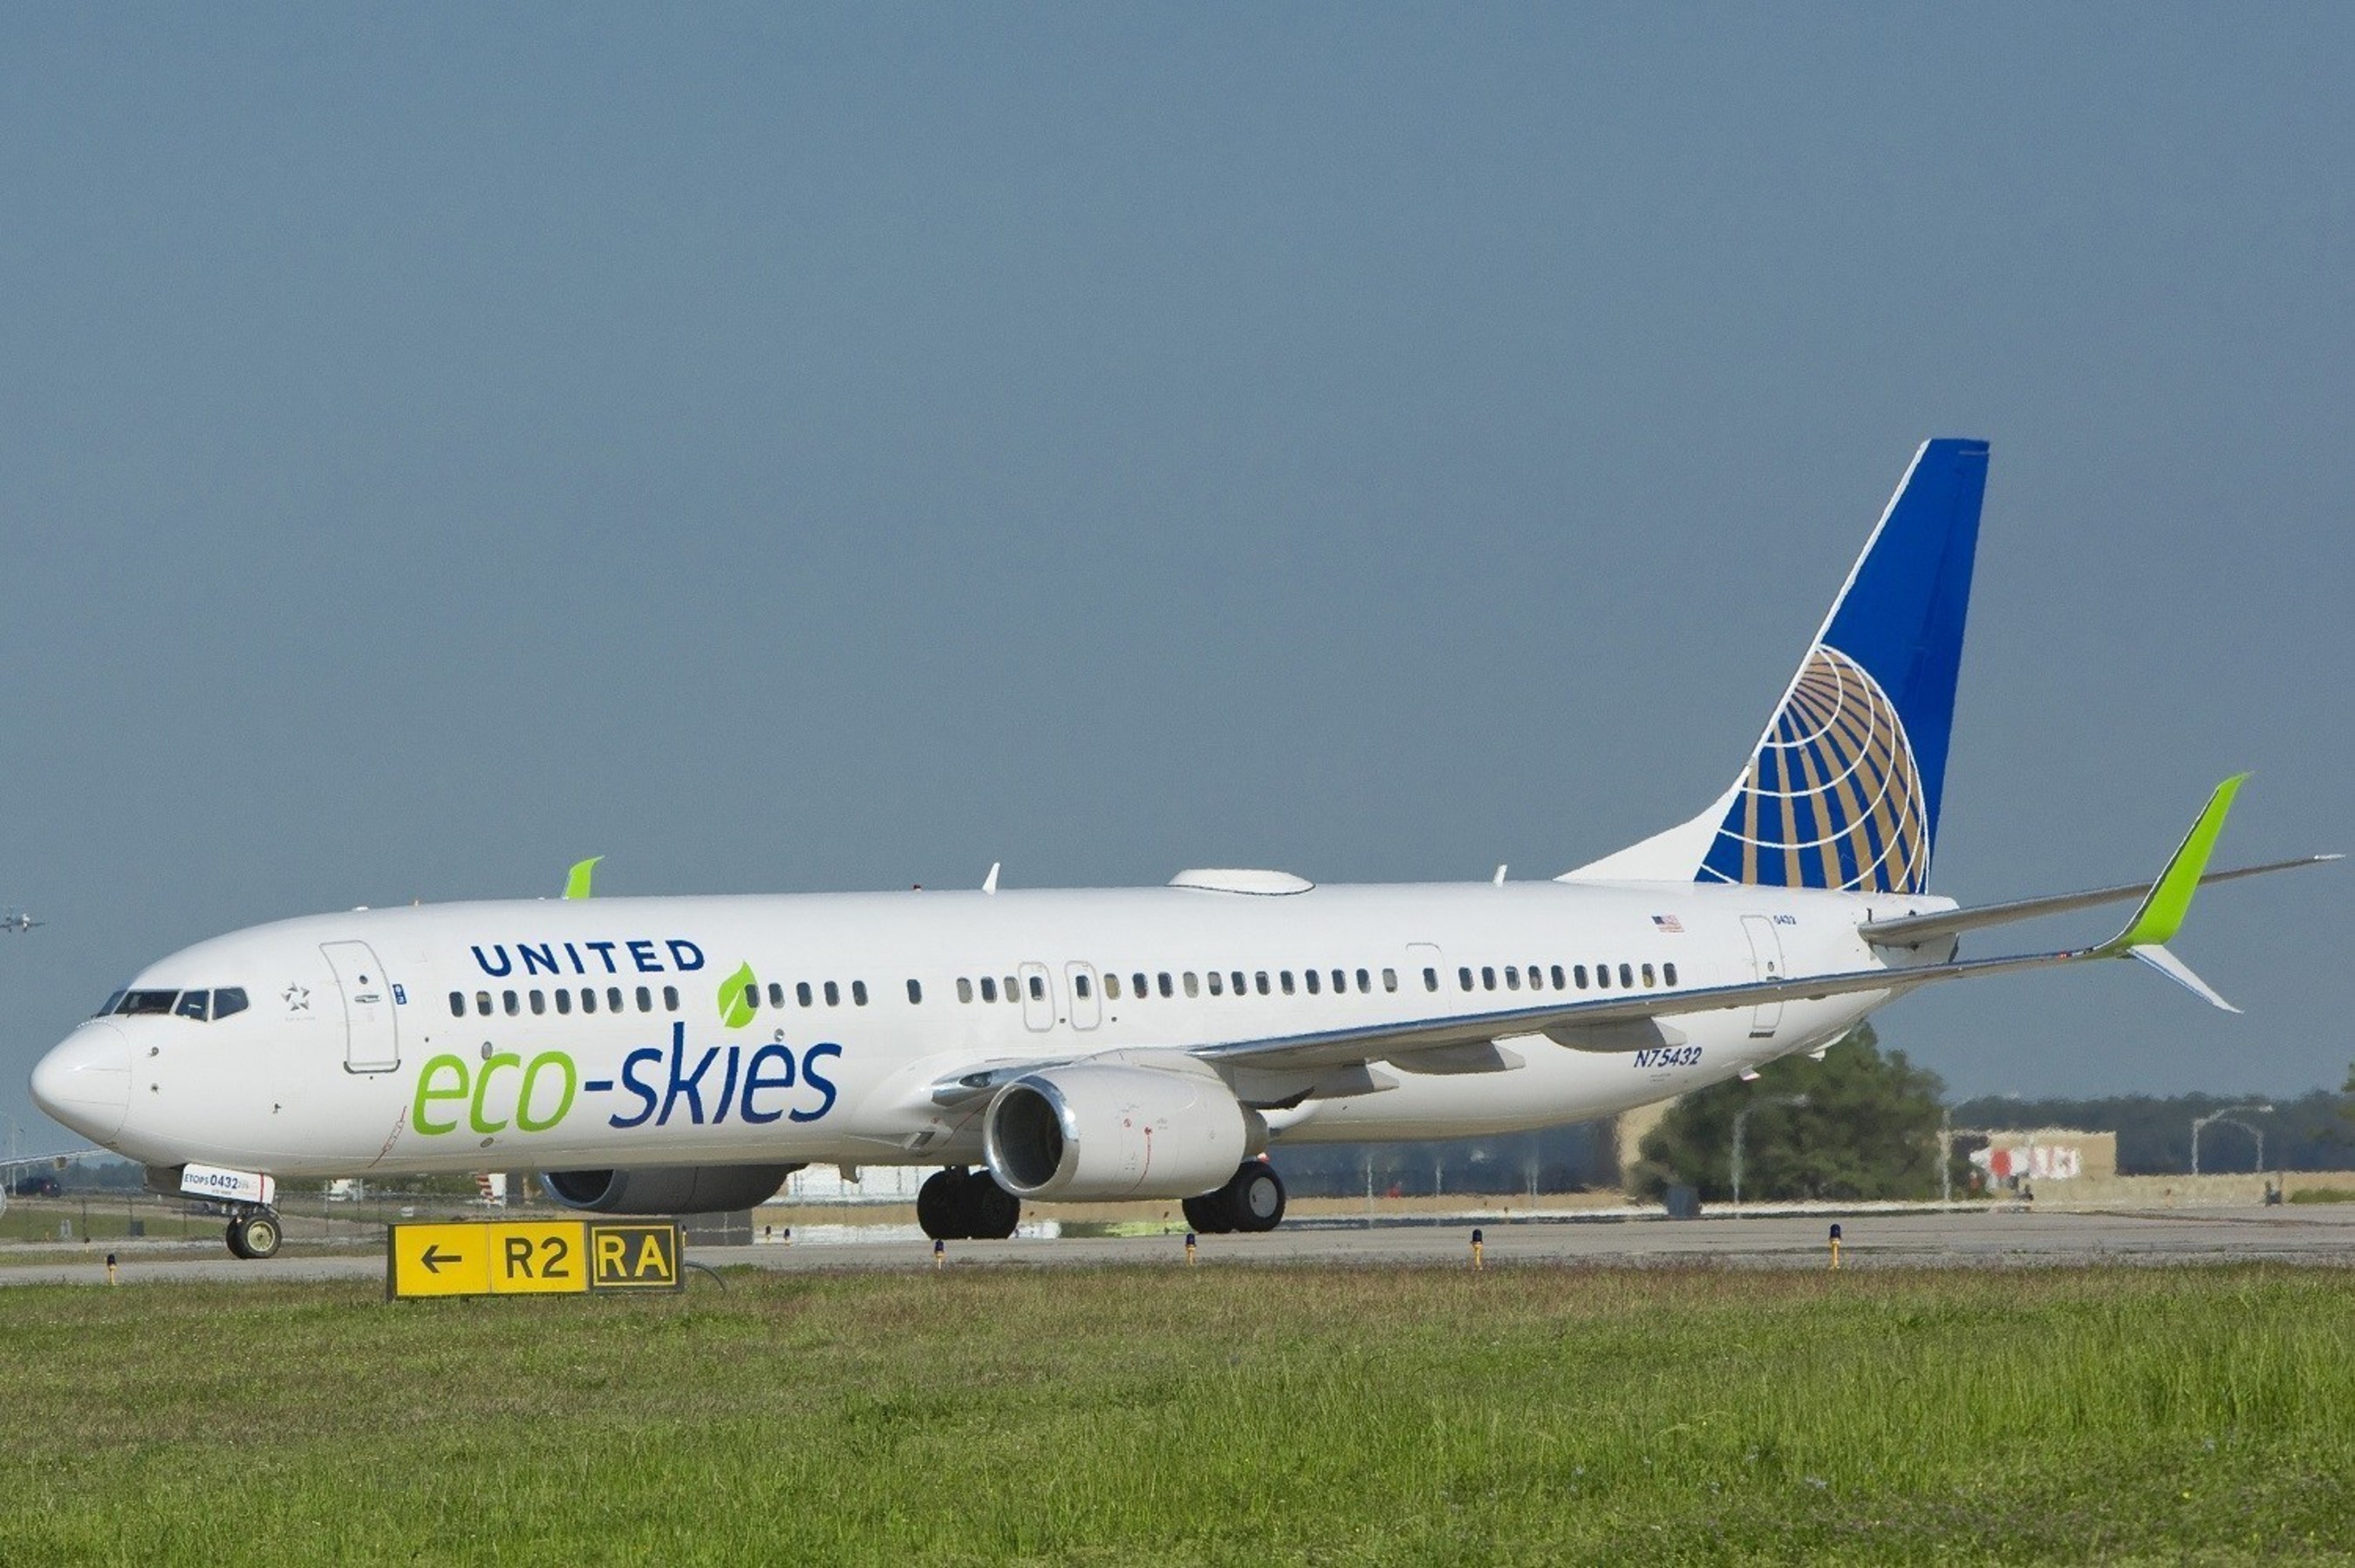 In April 2015, United is offsetting all carbon emissions from its Eco-Skies 737-900ER aircraft in honor of Earth Month